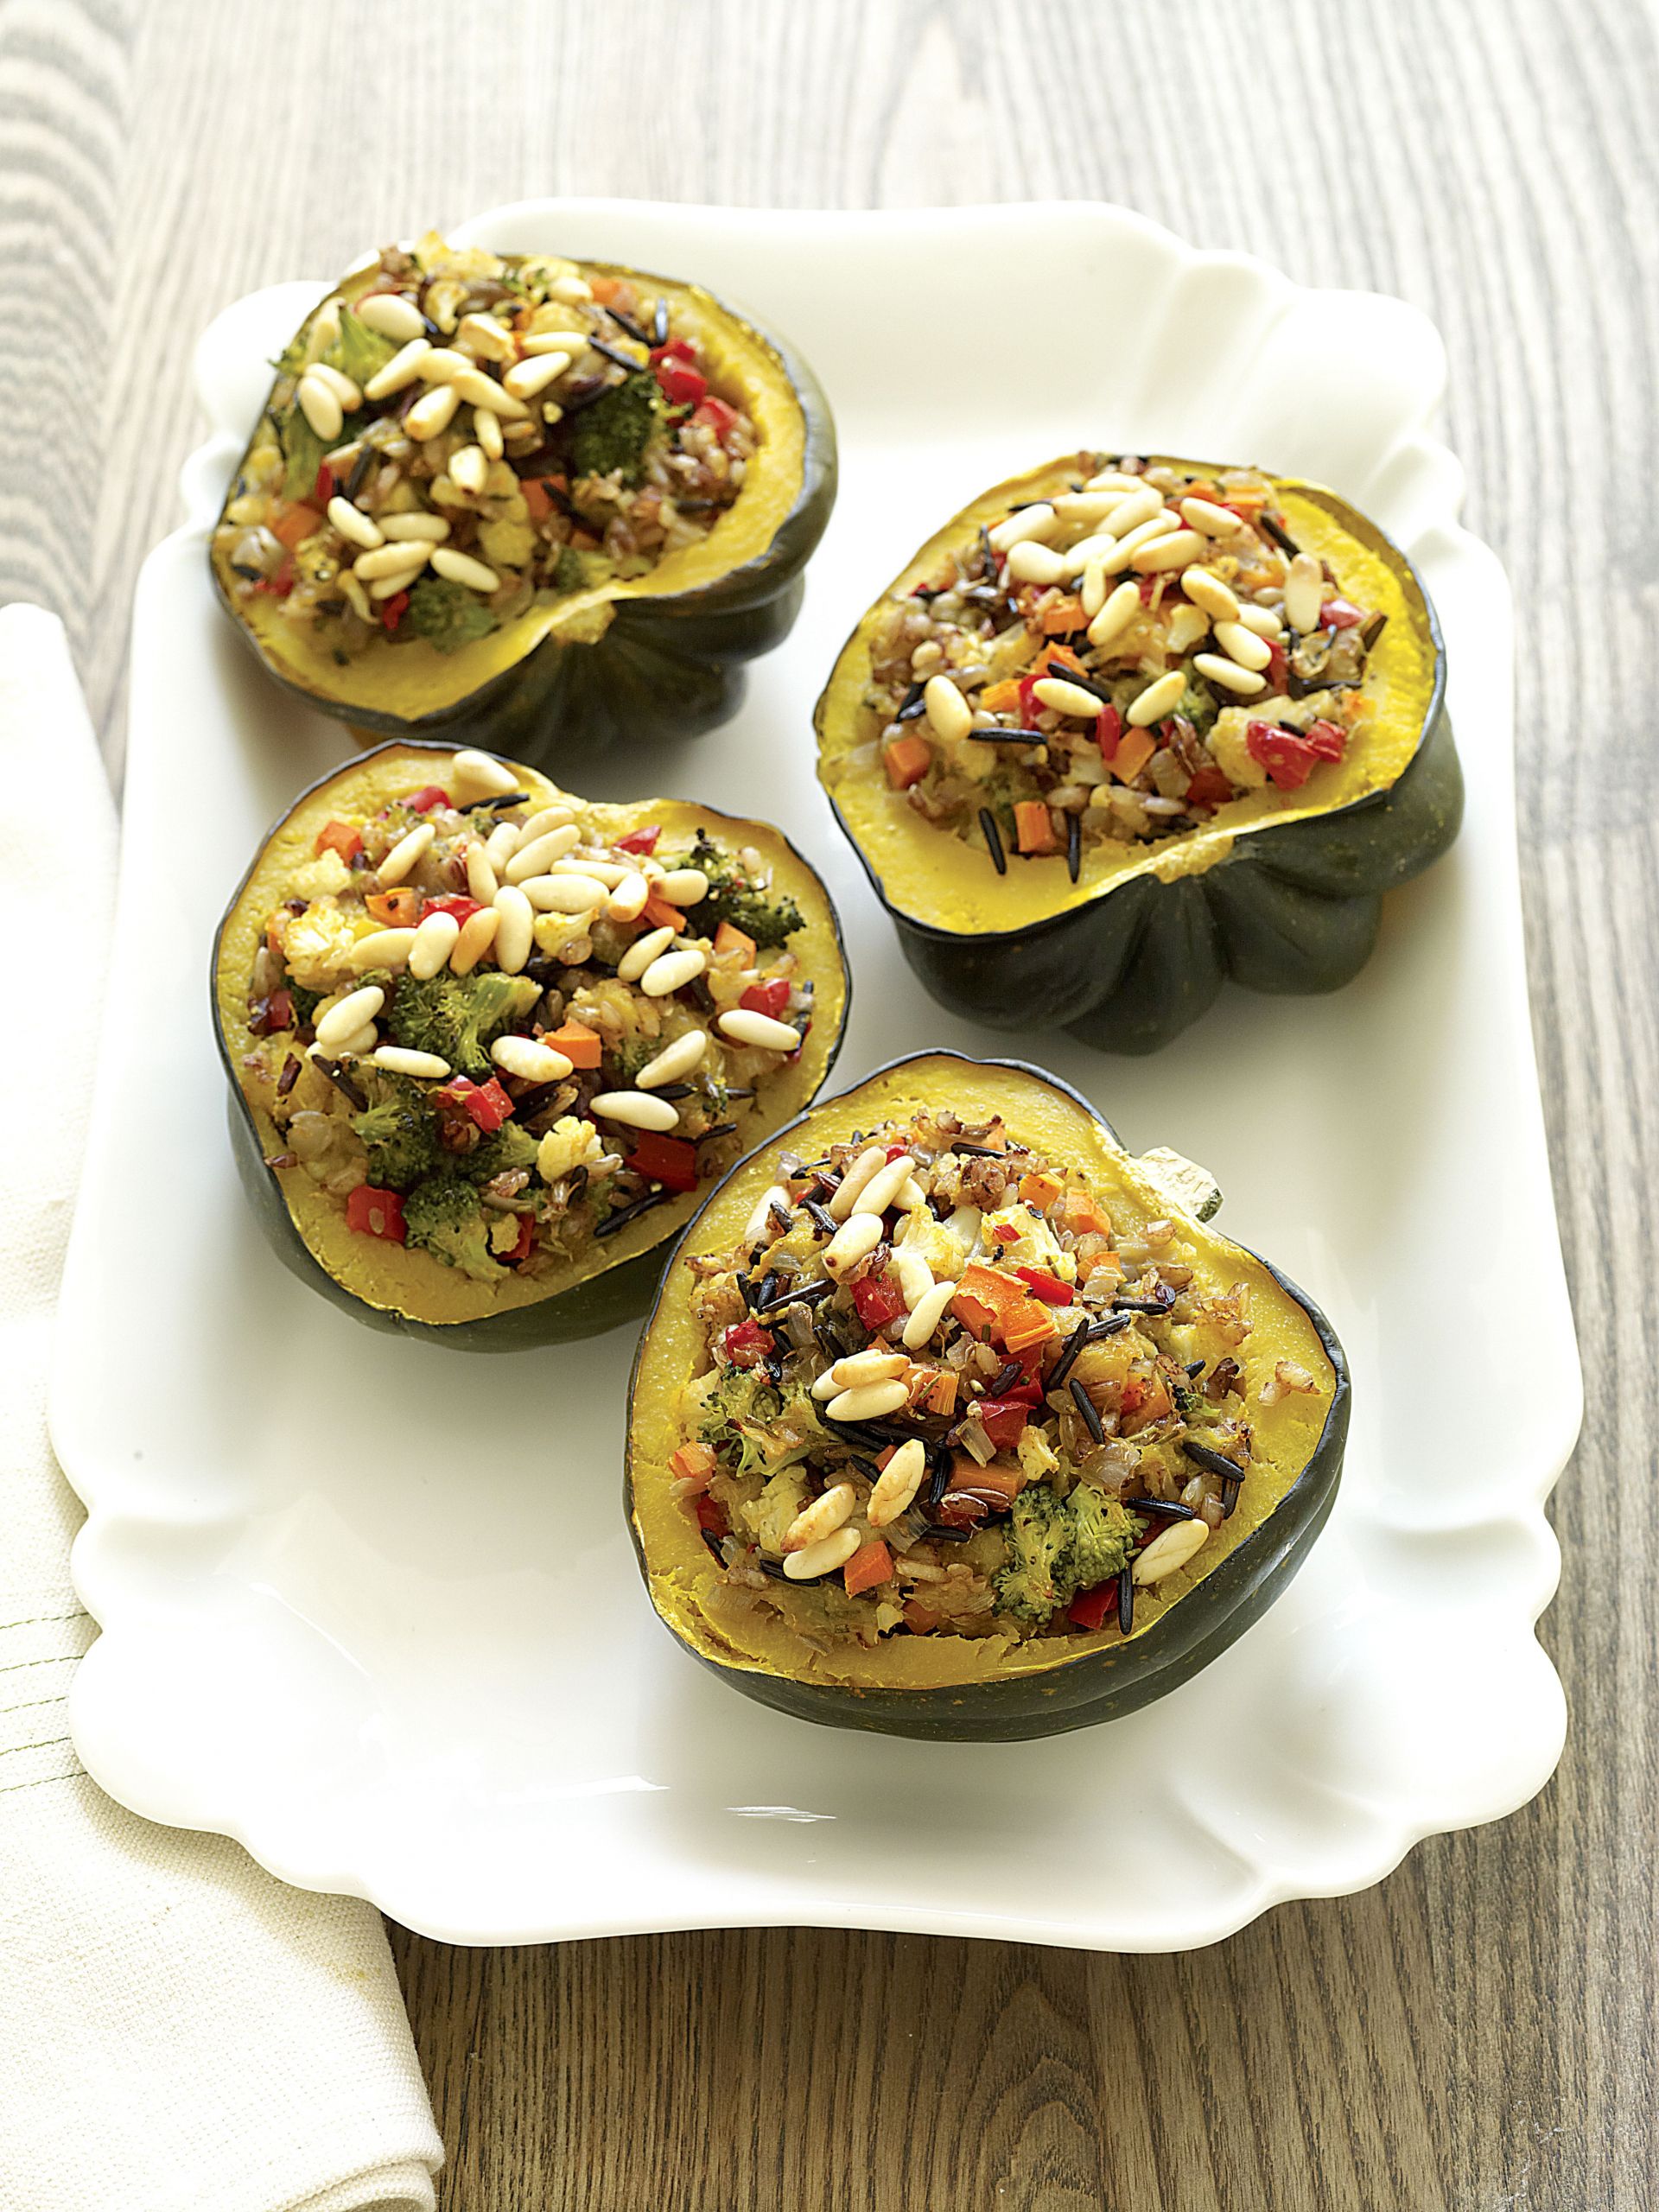 Plant Based Recipes Dinner Forks Over Knives
 Roasted Stuffed Winter Squash from the Forks Over Knives